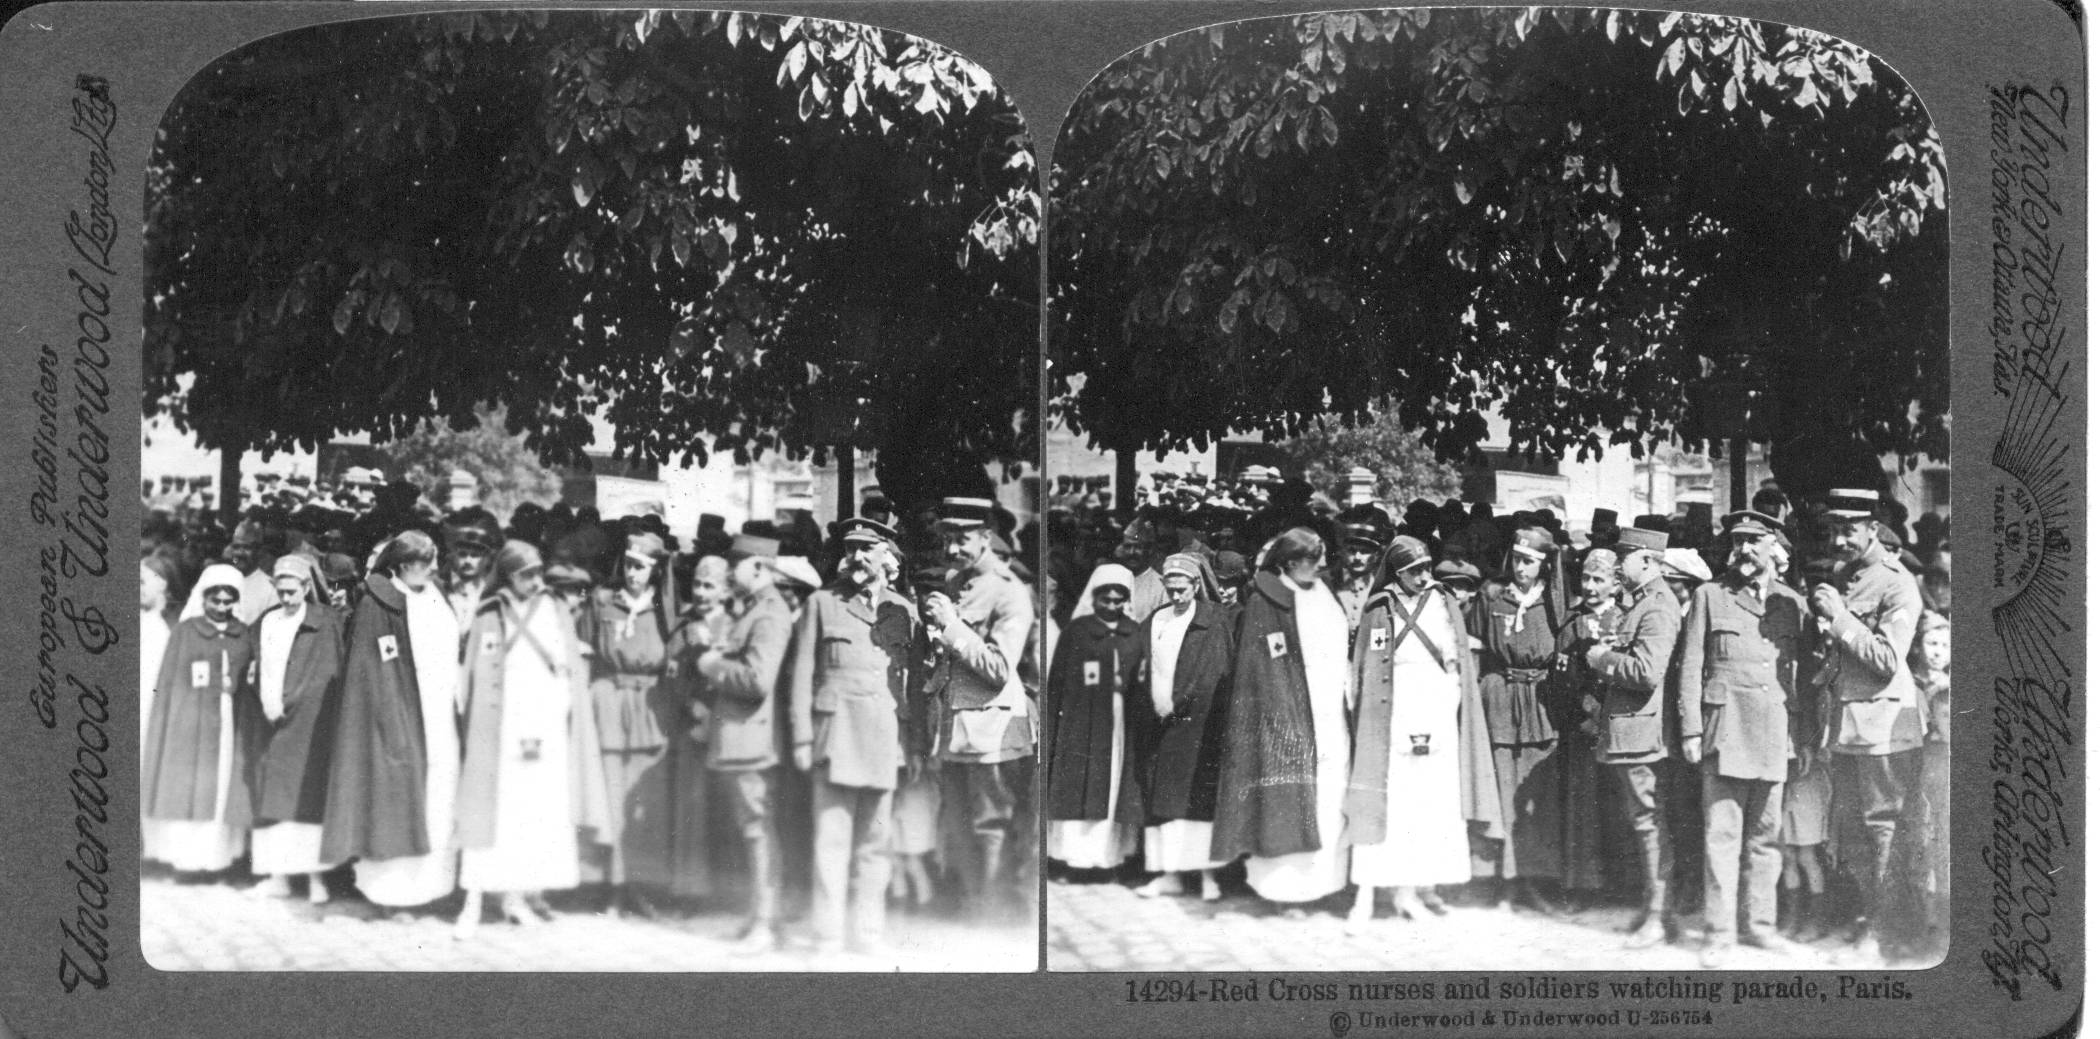 Red Cross nurses and soldiers watching parade, Paris